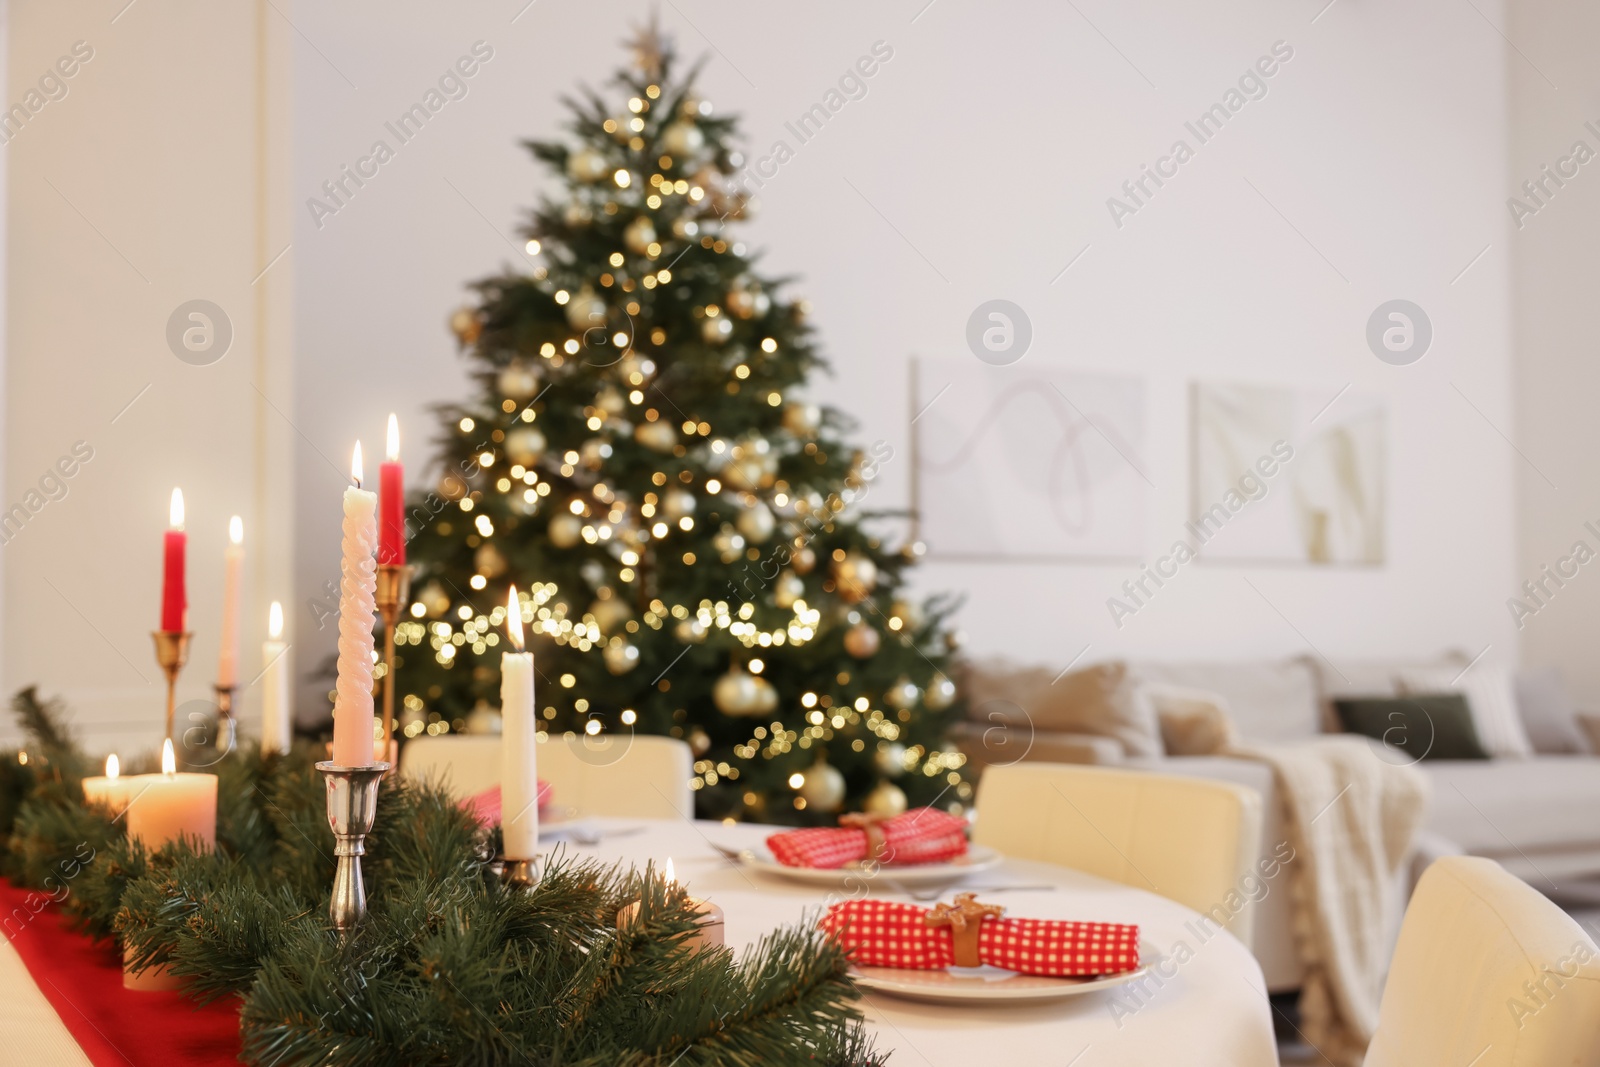 Photo of Festive table setting and beautiful Christmas decor in room. Interior design